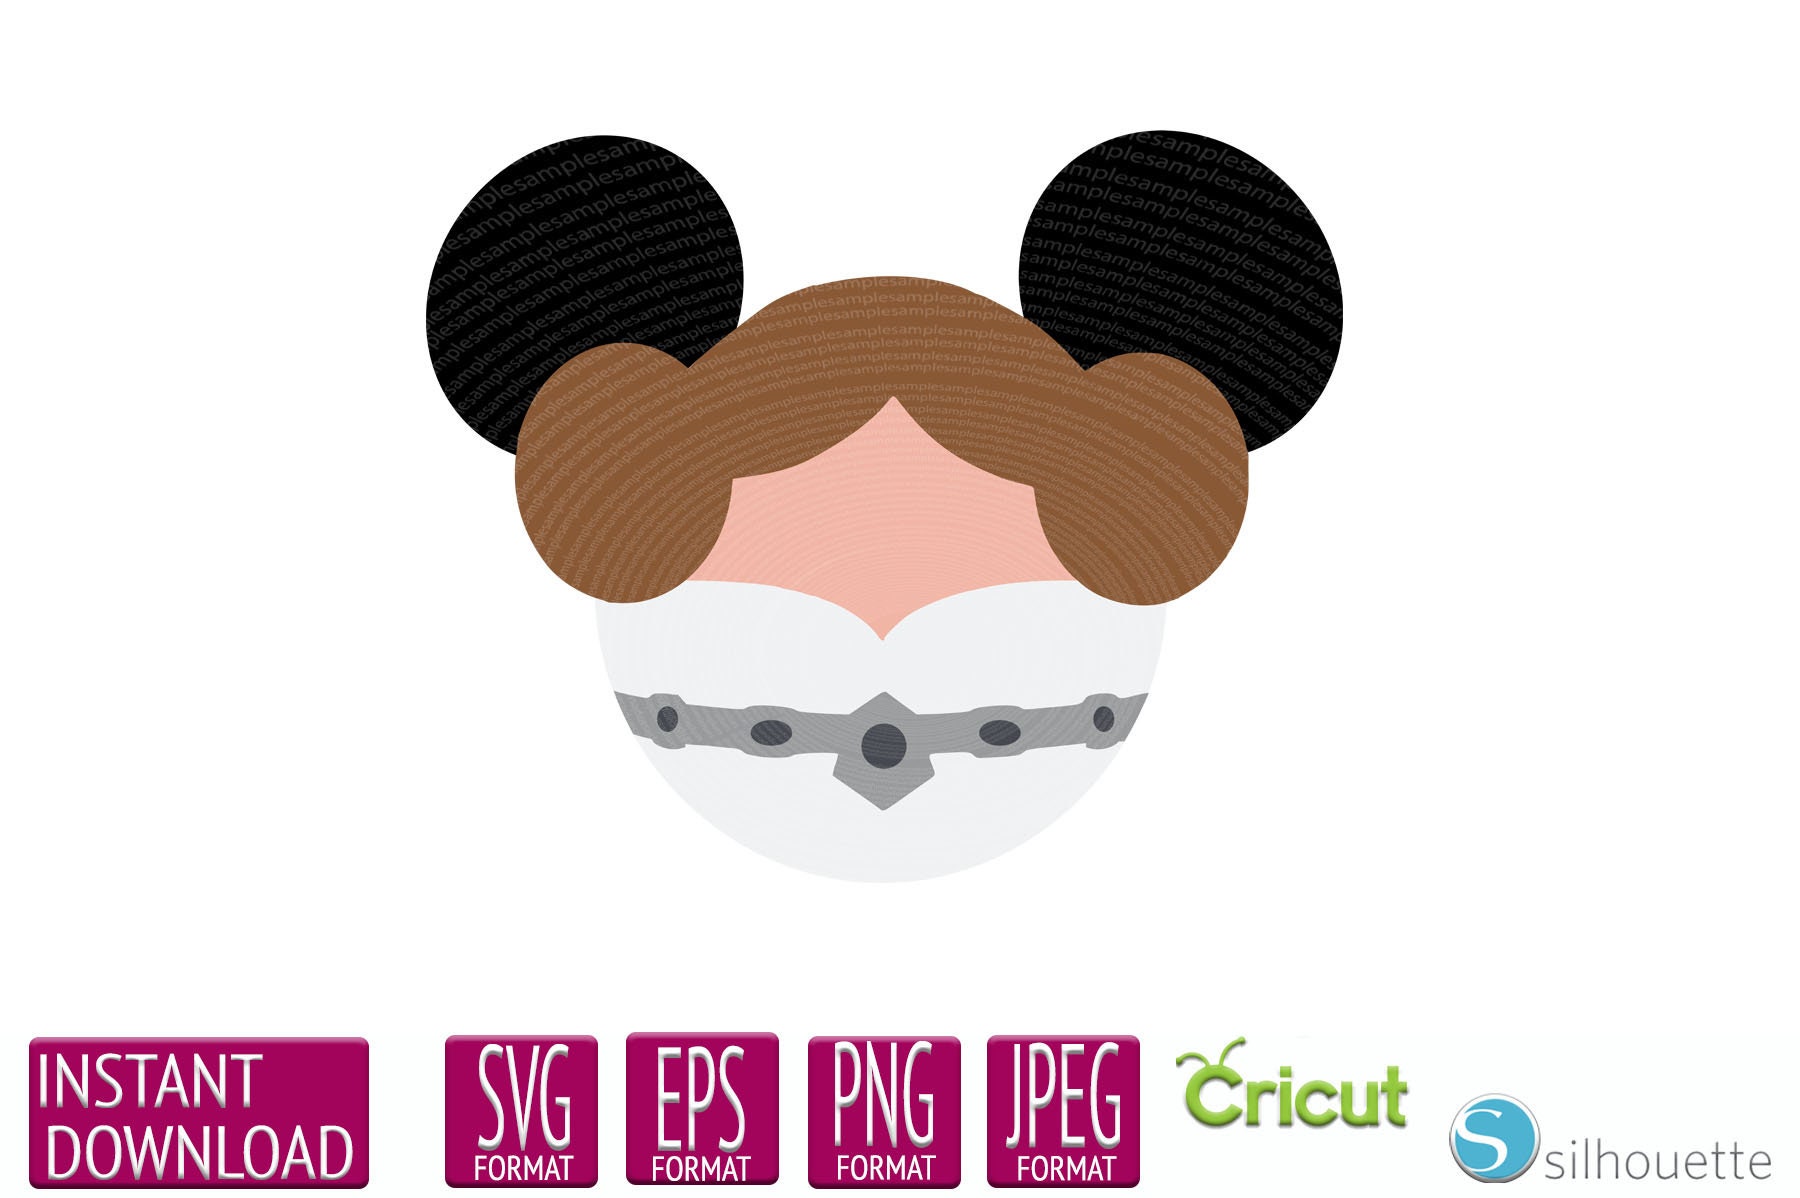 Download Instant Download Svg Star Wars Princess Leia Mickey Ears For Etsy